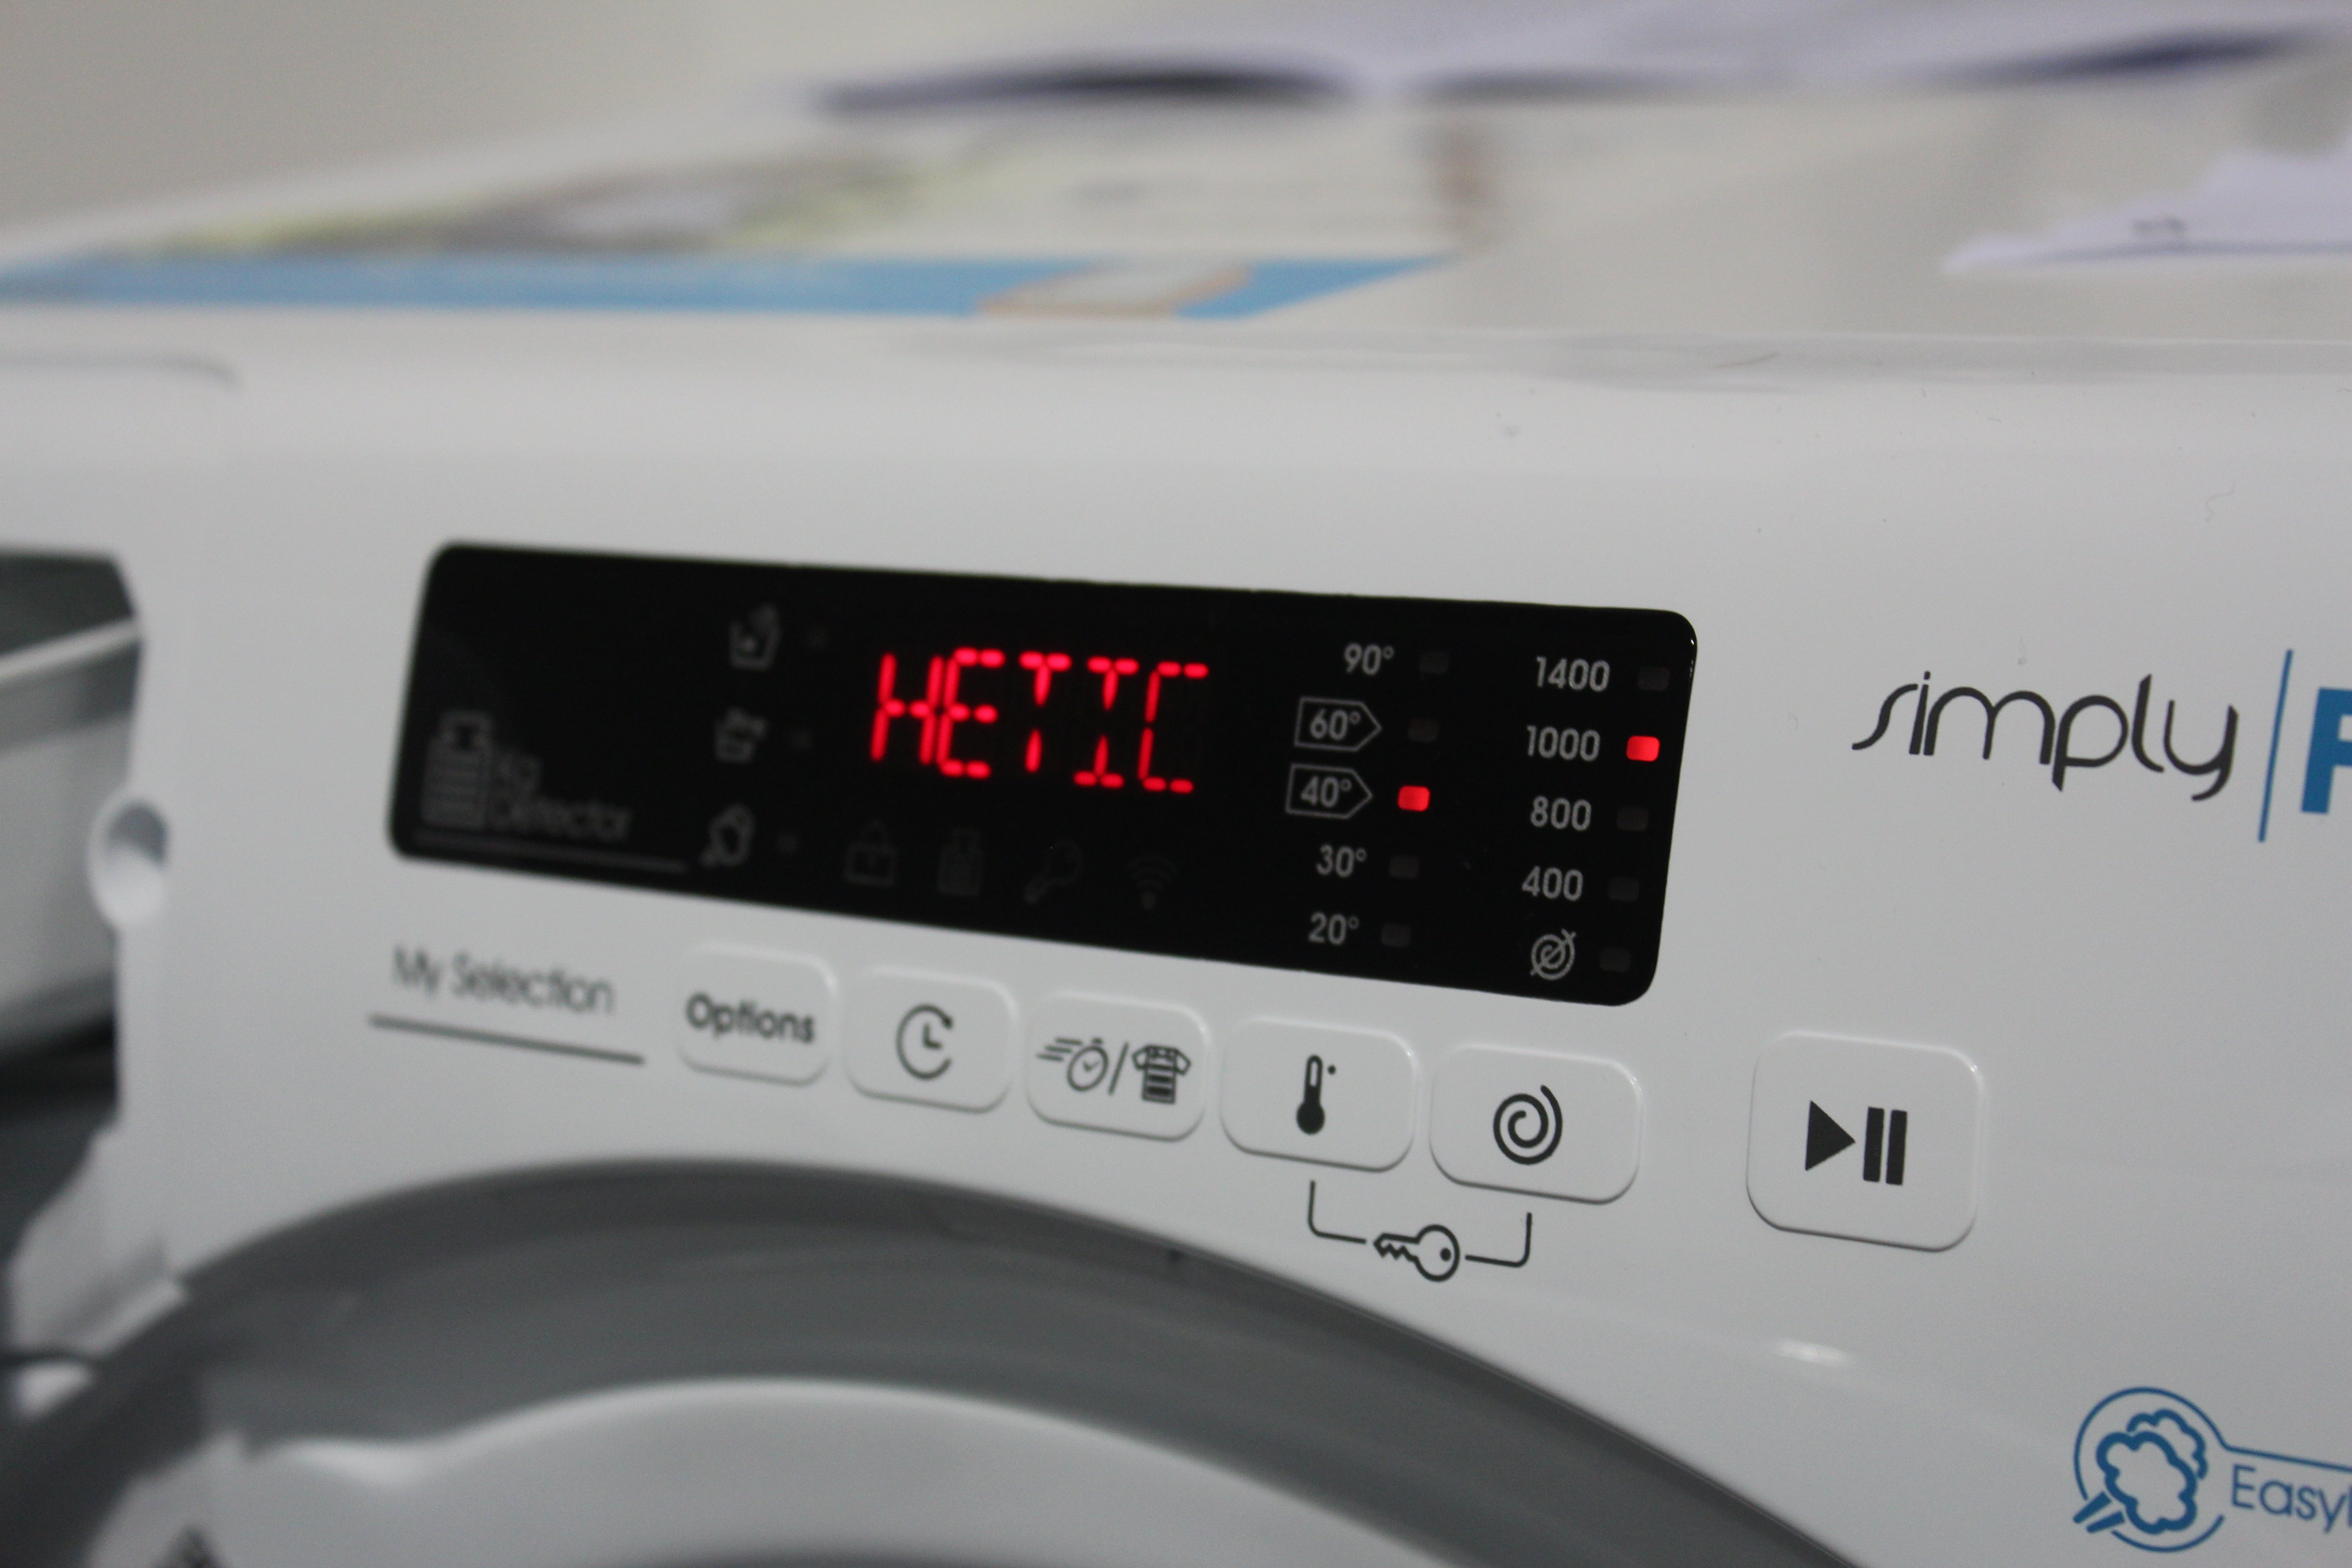 Close up picture of a control panel and mini screen on a white Candy Smart Pro washing machine